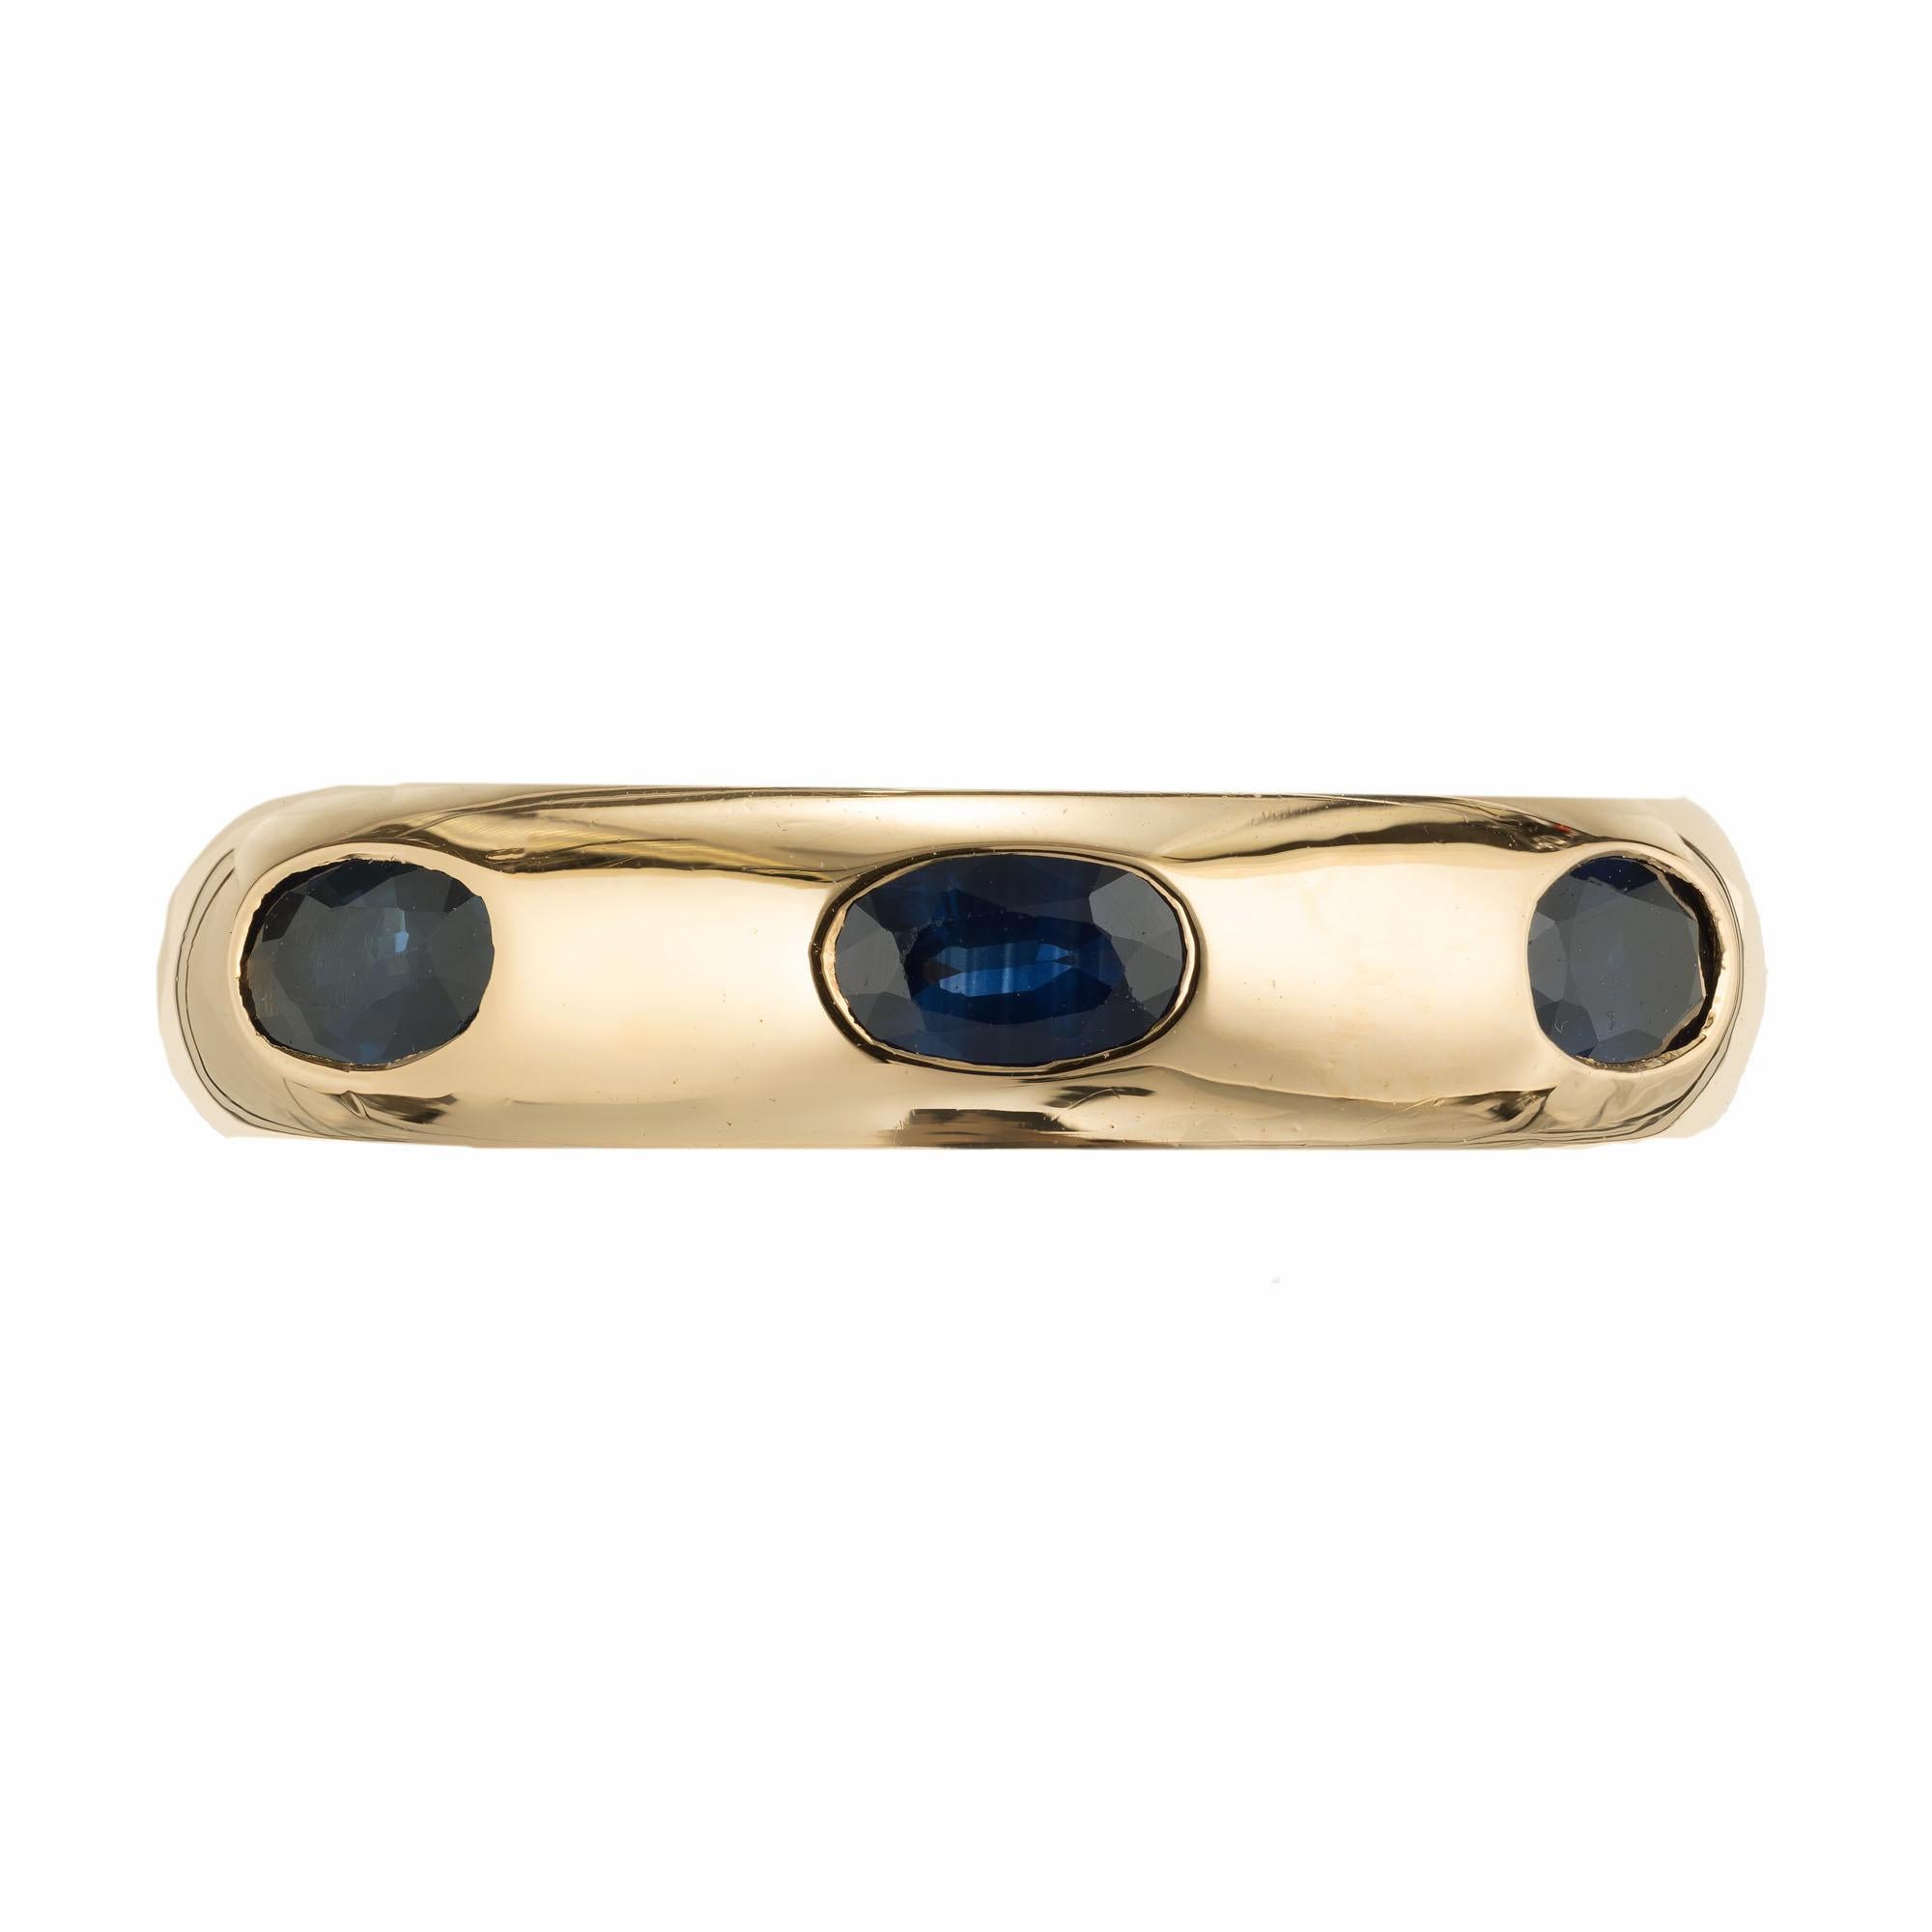 Fred the Jeweler Solid 18k yellow gold oval Sapphire band ring. 

7 oval genuine bright blue 5 x 3mm Sapphires, approx. total weight 2.45cts
Size 5 1/2 and limited sizing
18k Yellow Gold
Stamped: Fred 750 MA 96113
Width: 5.13mm
Depth: 3.03mm
9.6